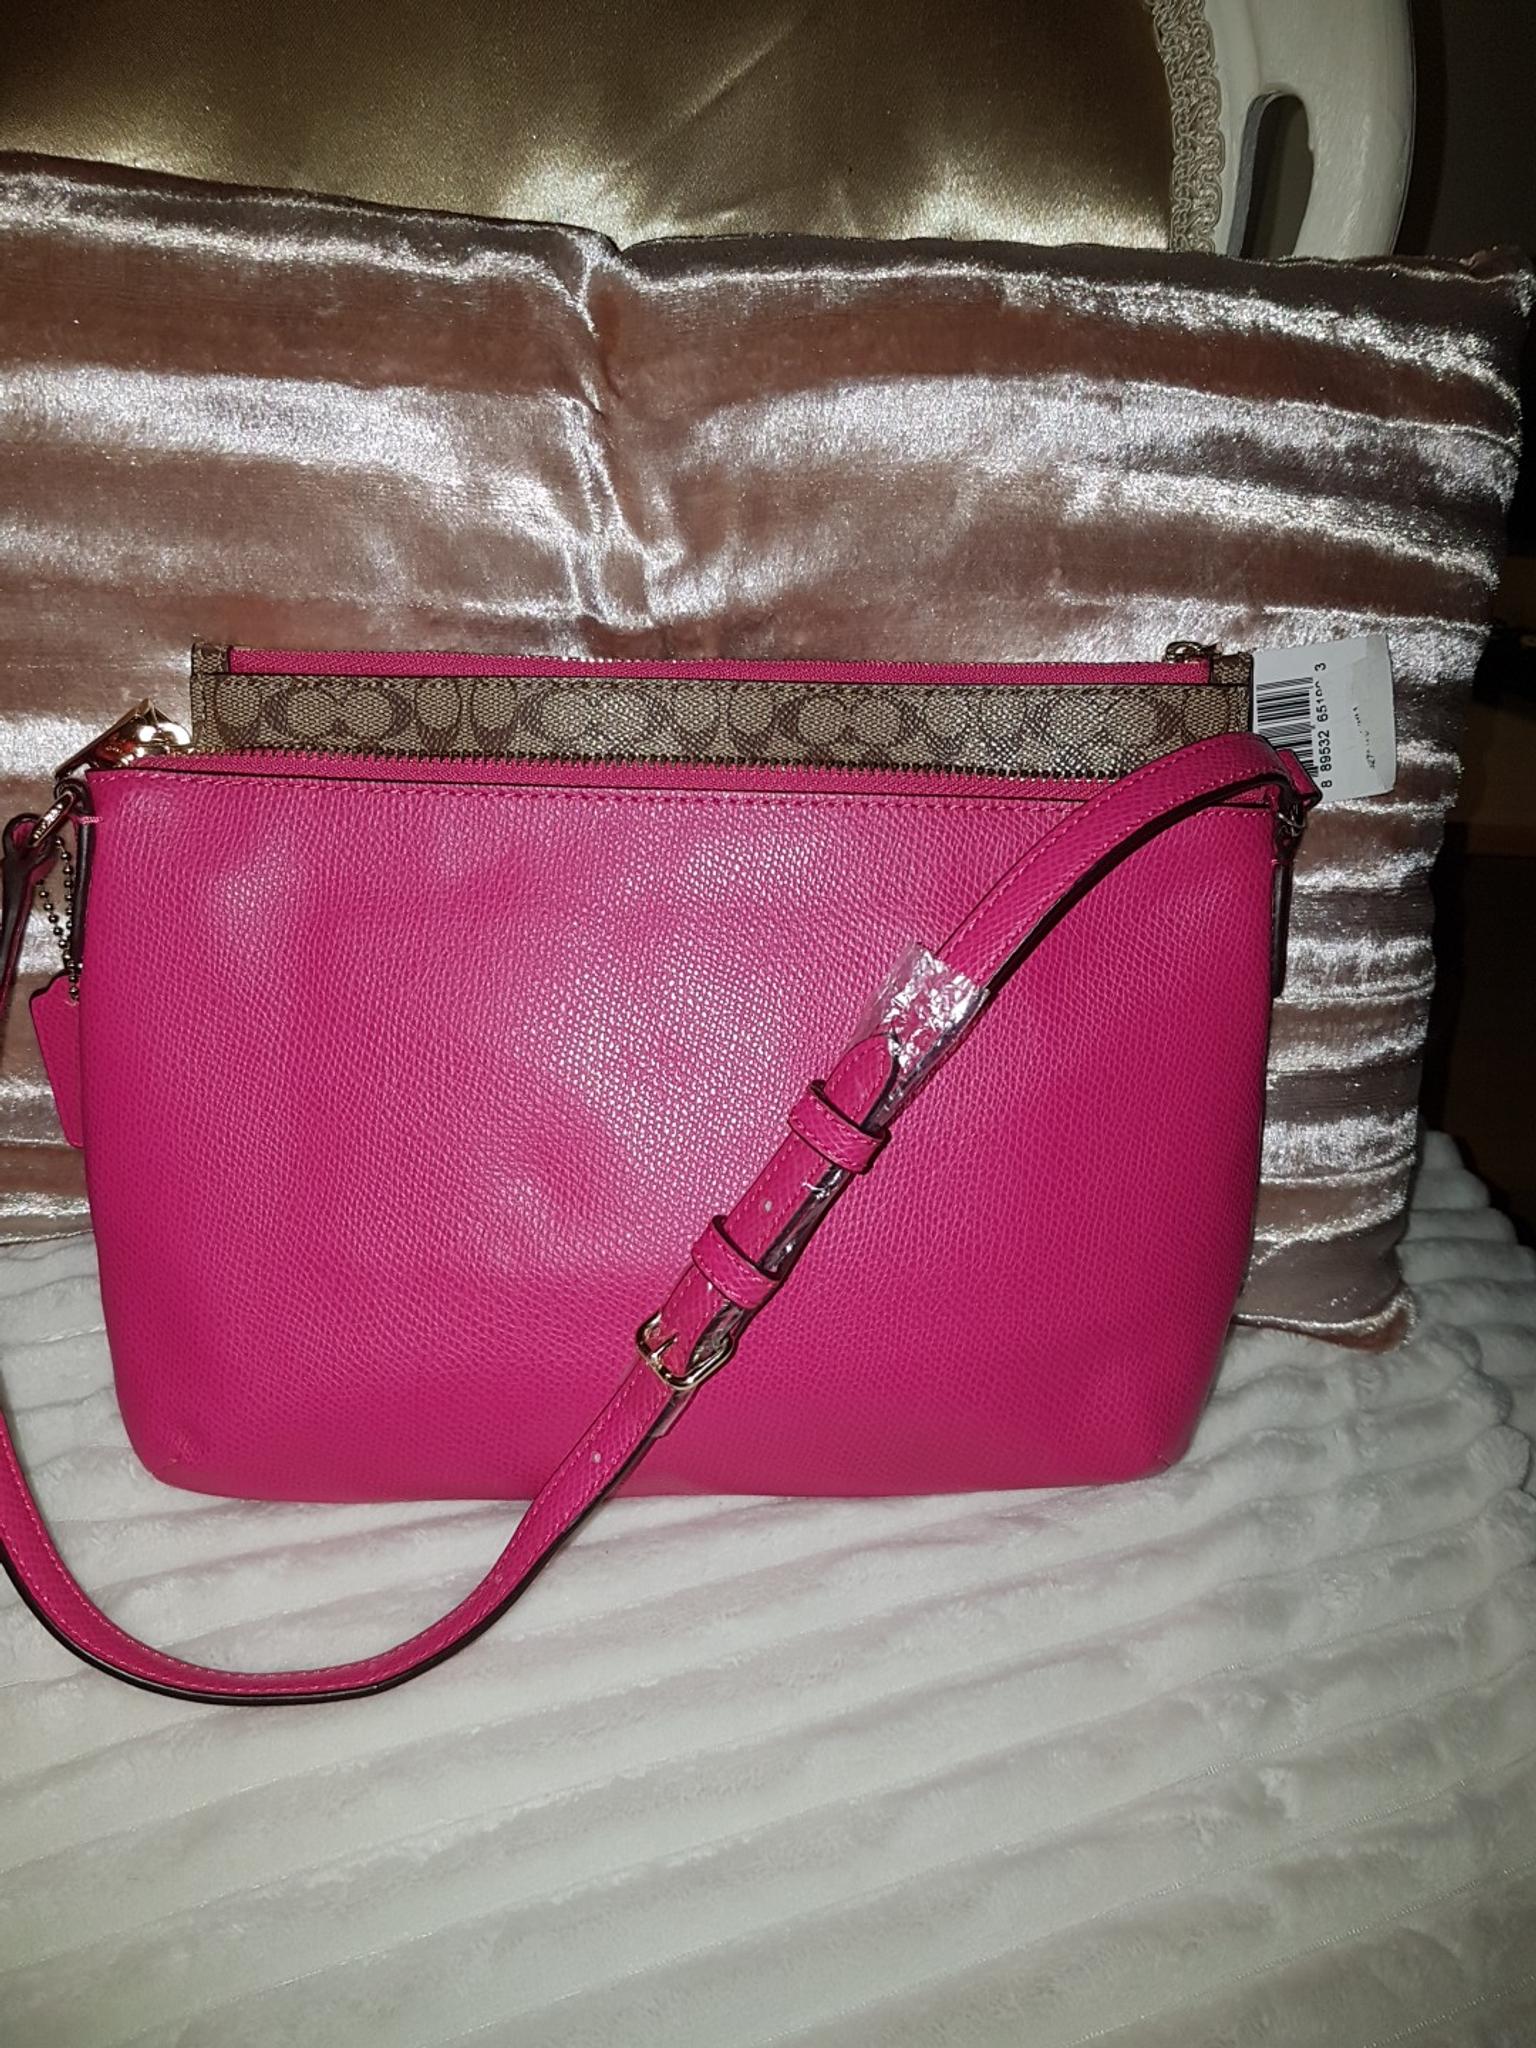 New with tags Coach Hot Pink Crossbody Bag in HX2 Calderdale for £50.00 for sale | Shpock